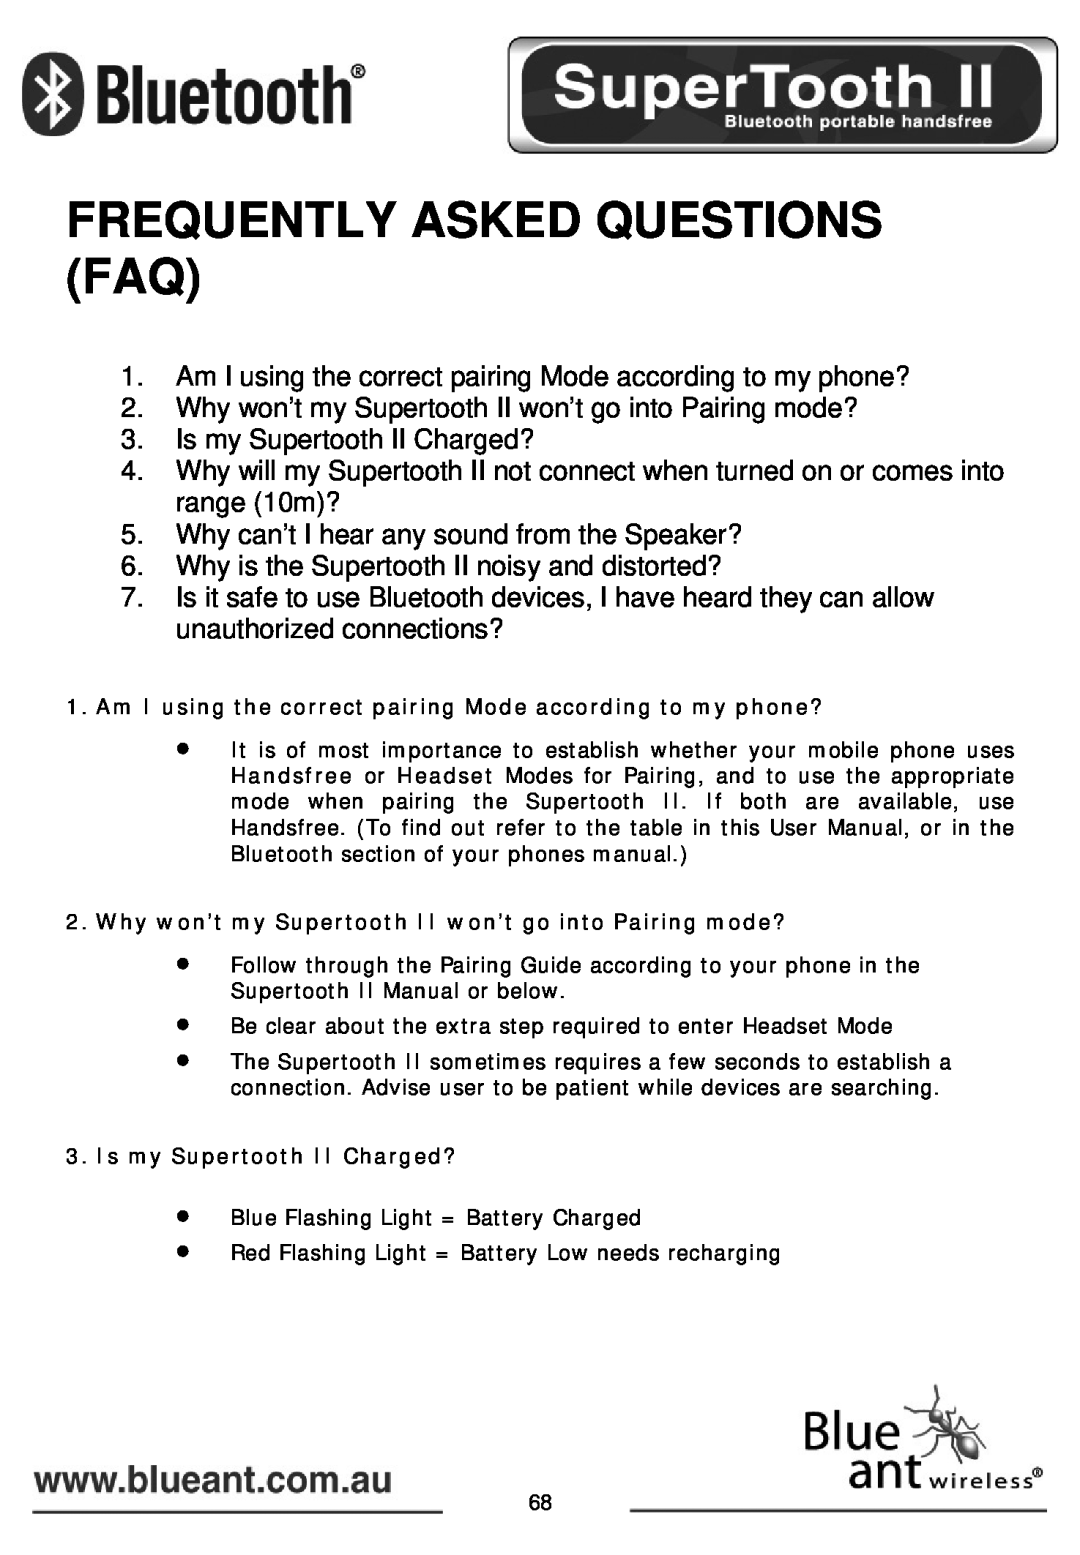 BlueAnt Wireless SUPERTOOTH II manual Frequently Asked Questions Faq 